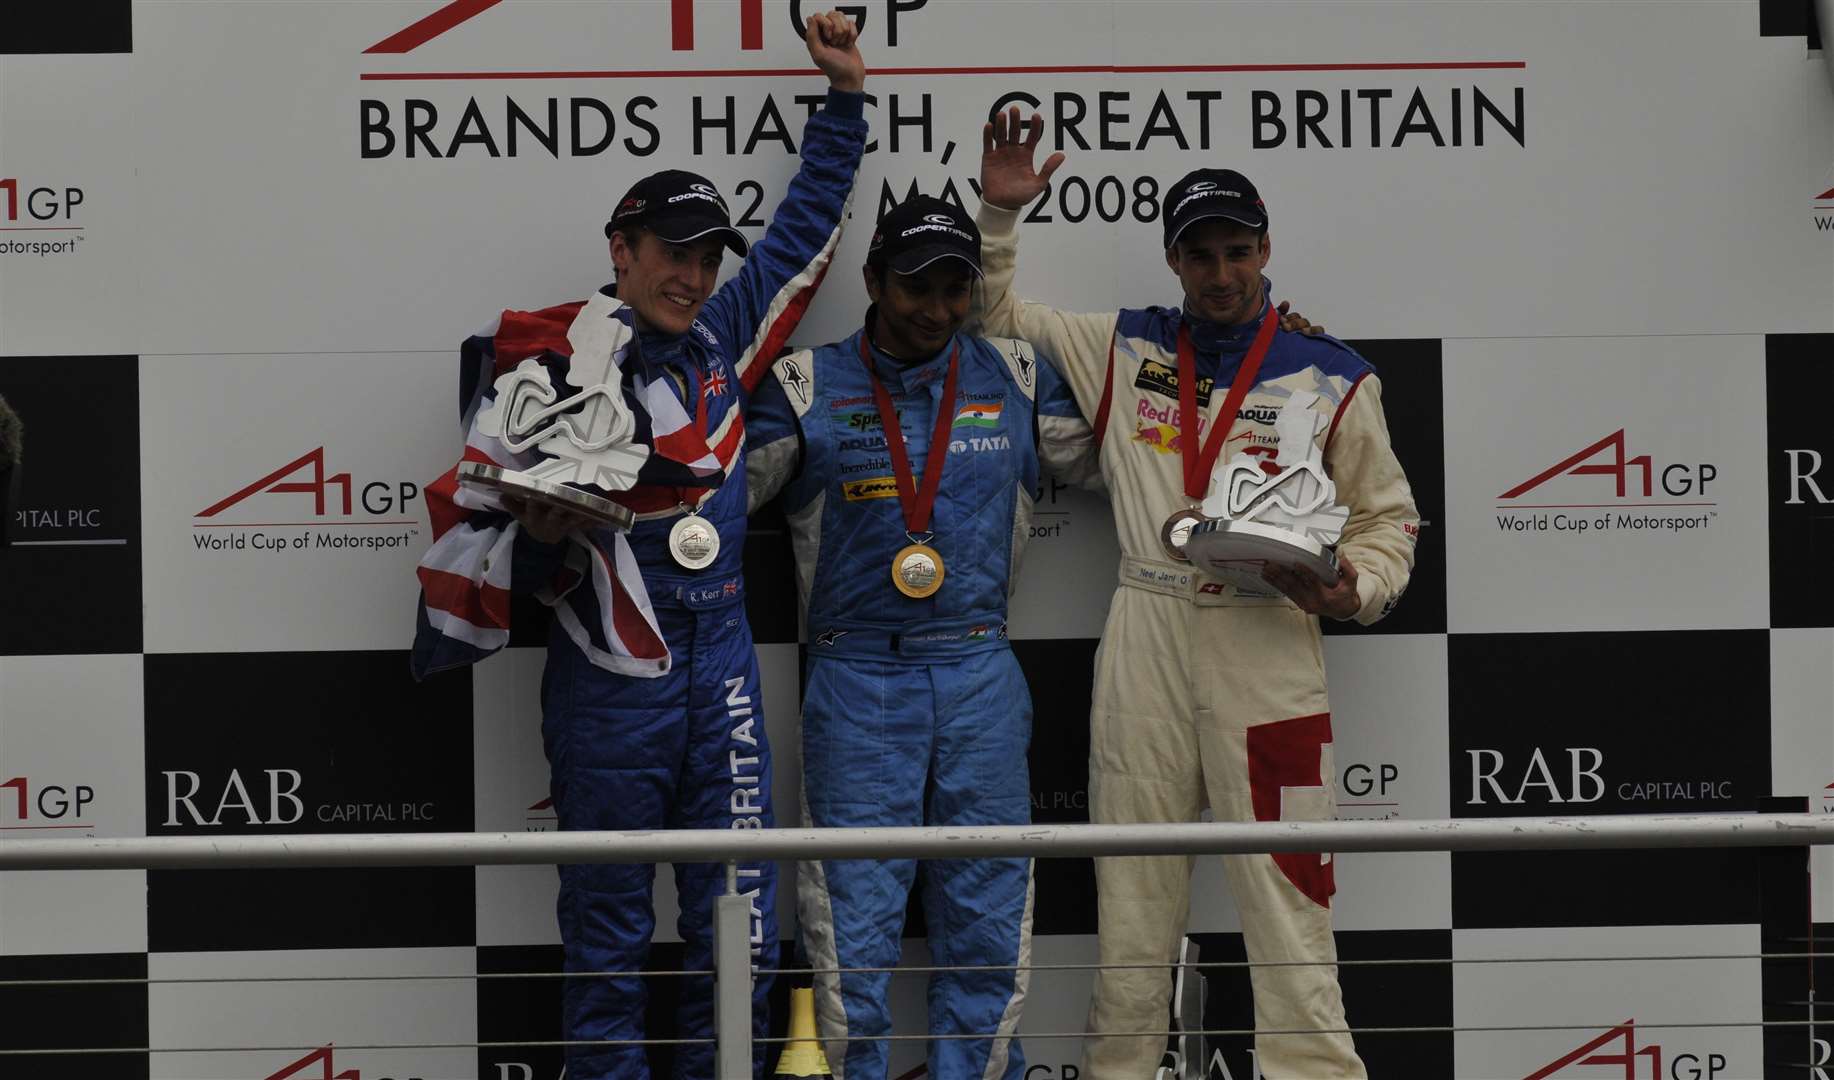 The feature race podium in May 2008: Team GB's Robbie Kerr, race winner Narain Karthikeyan and Swiss star Neel Jani. Picture: Andy Payton